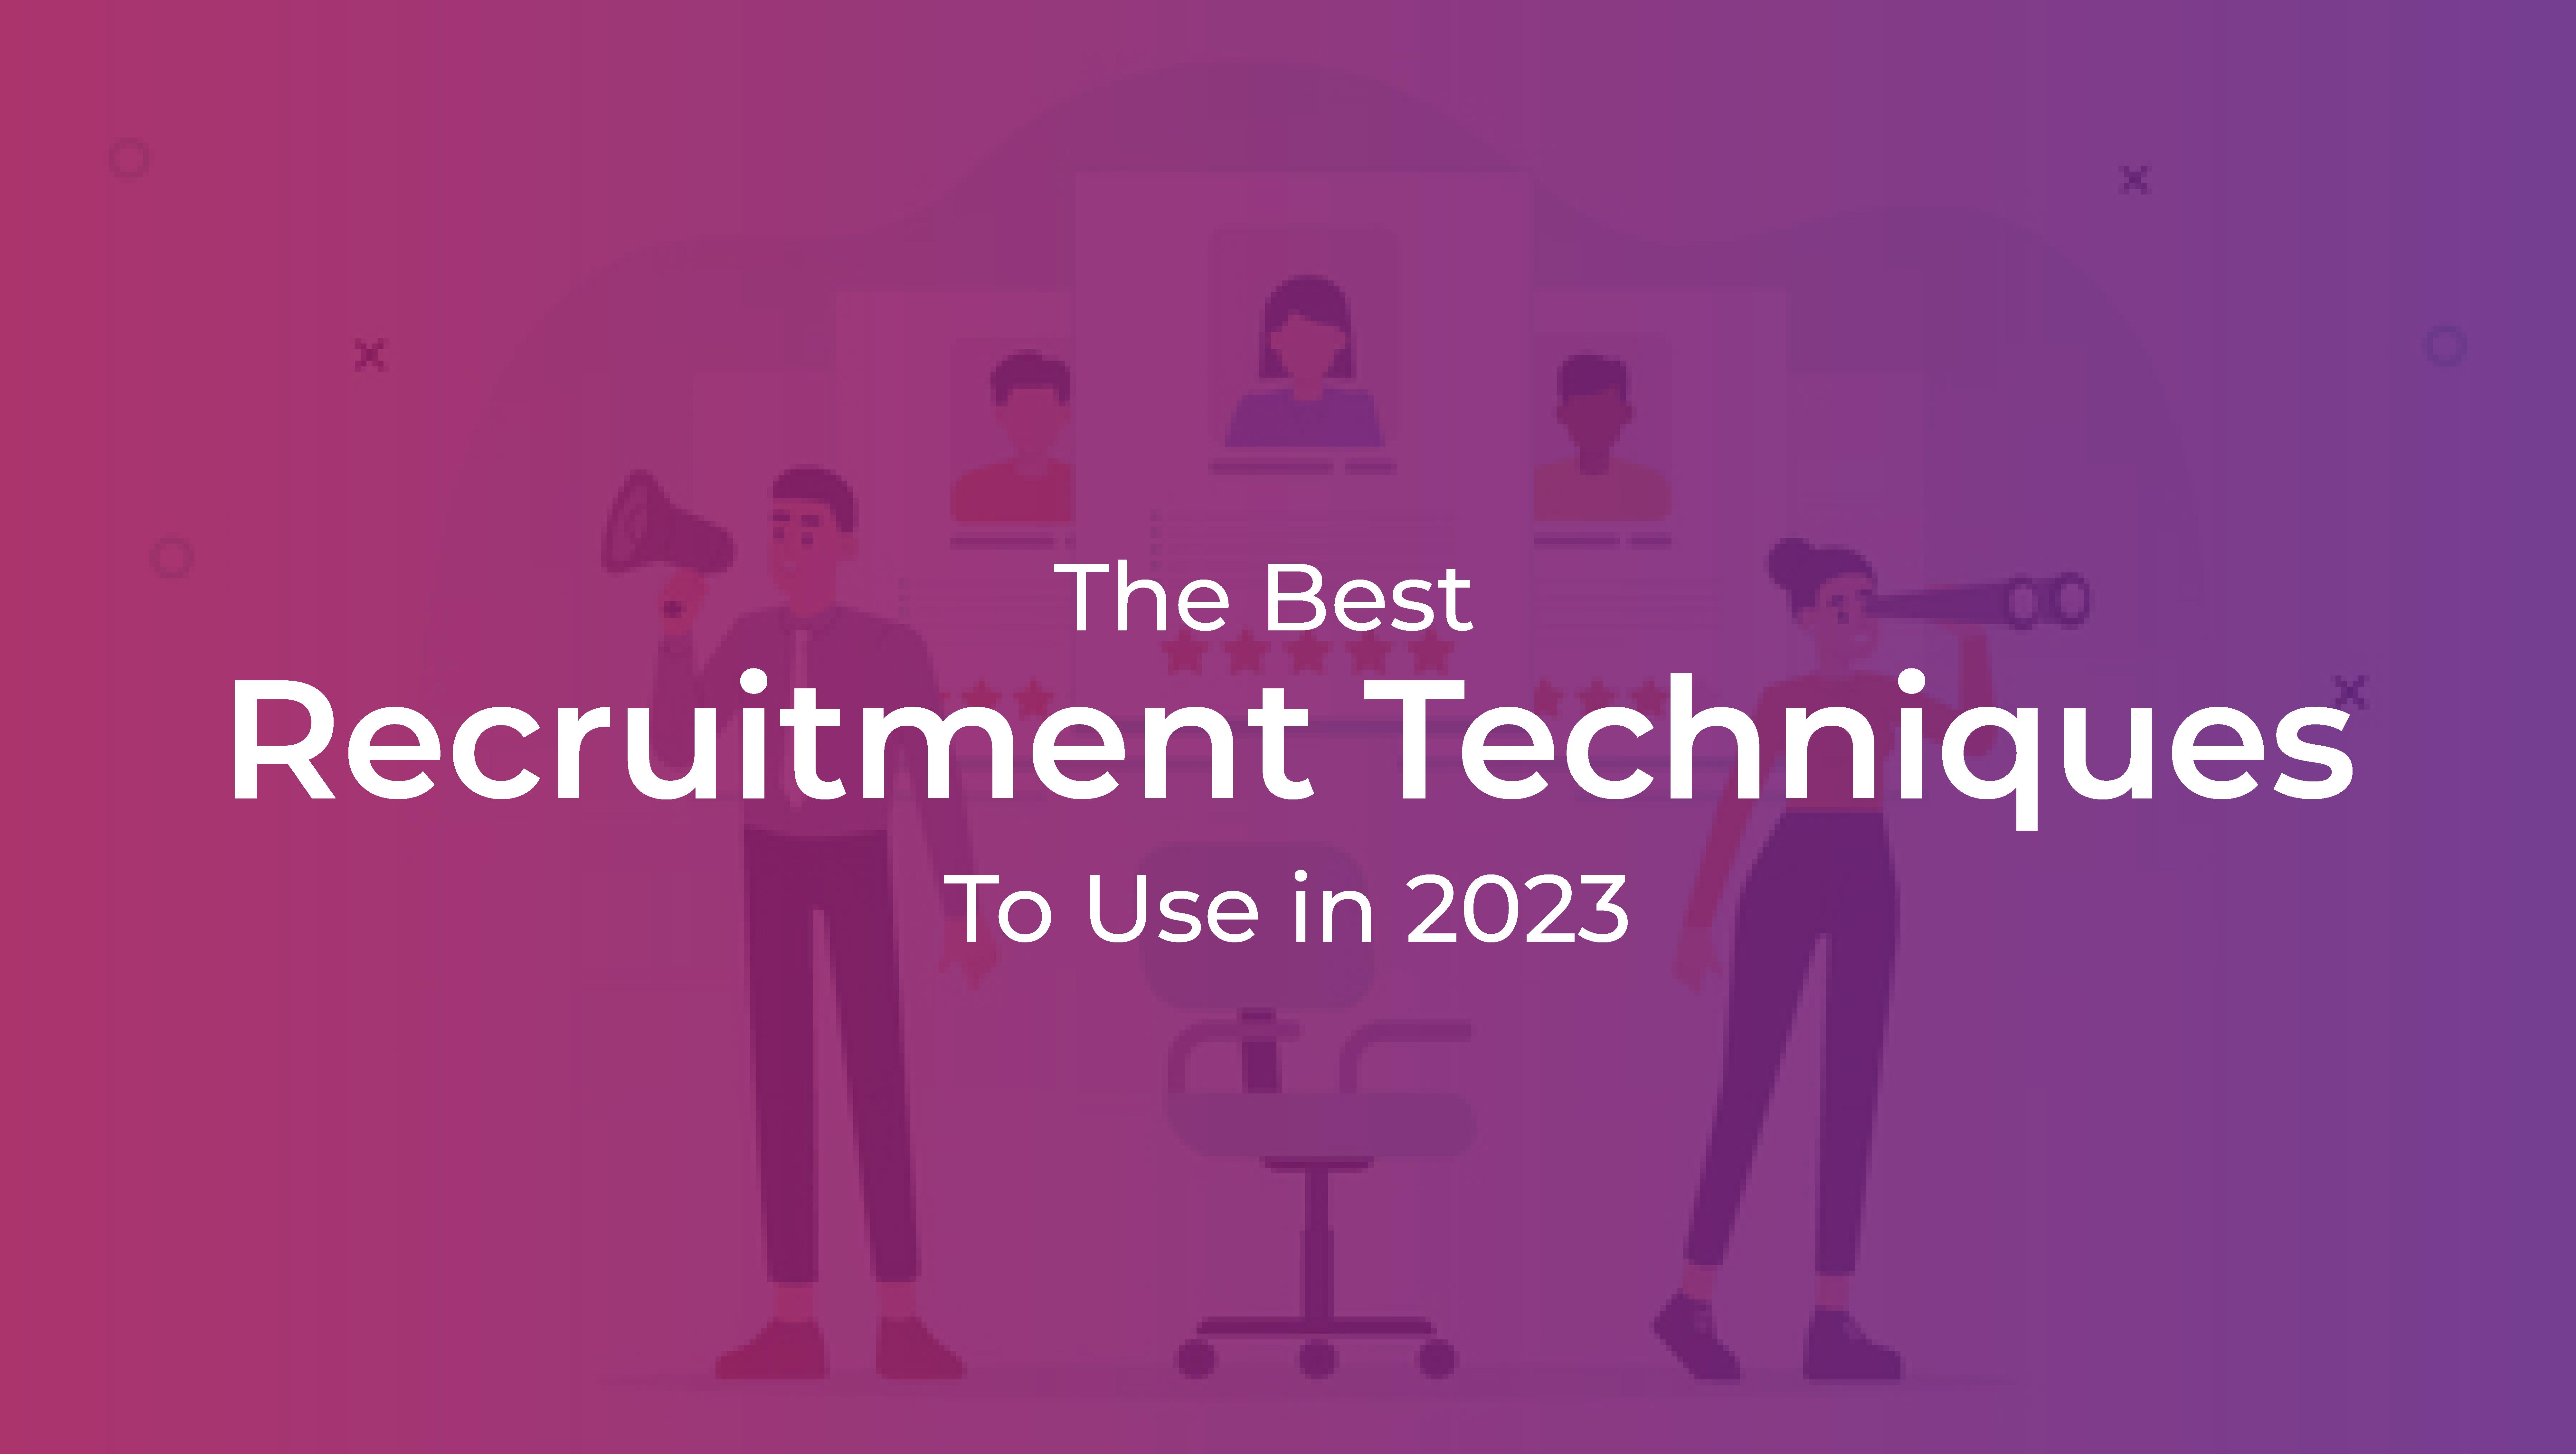 The best recruitment techniques to use in 2023